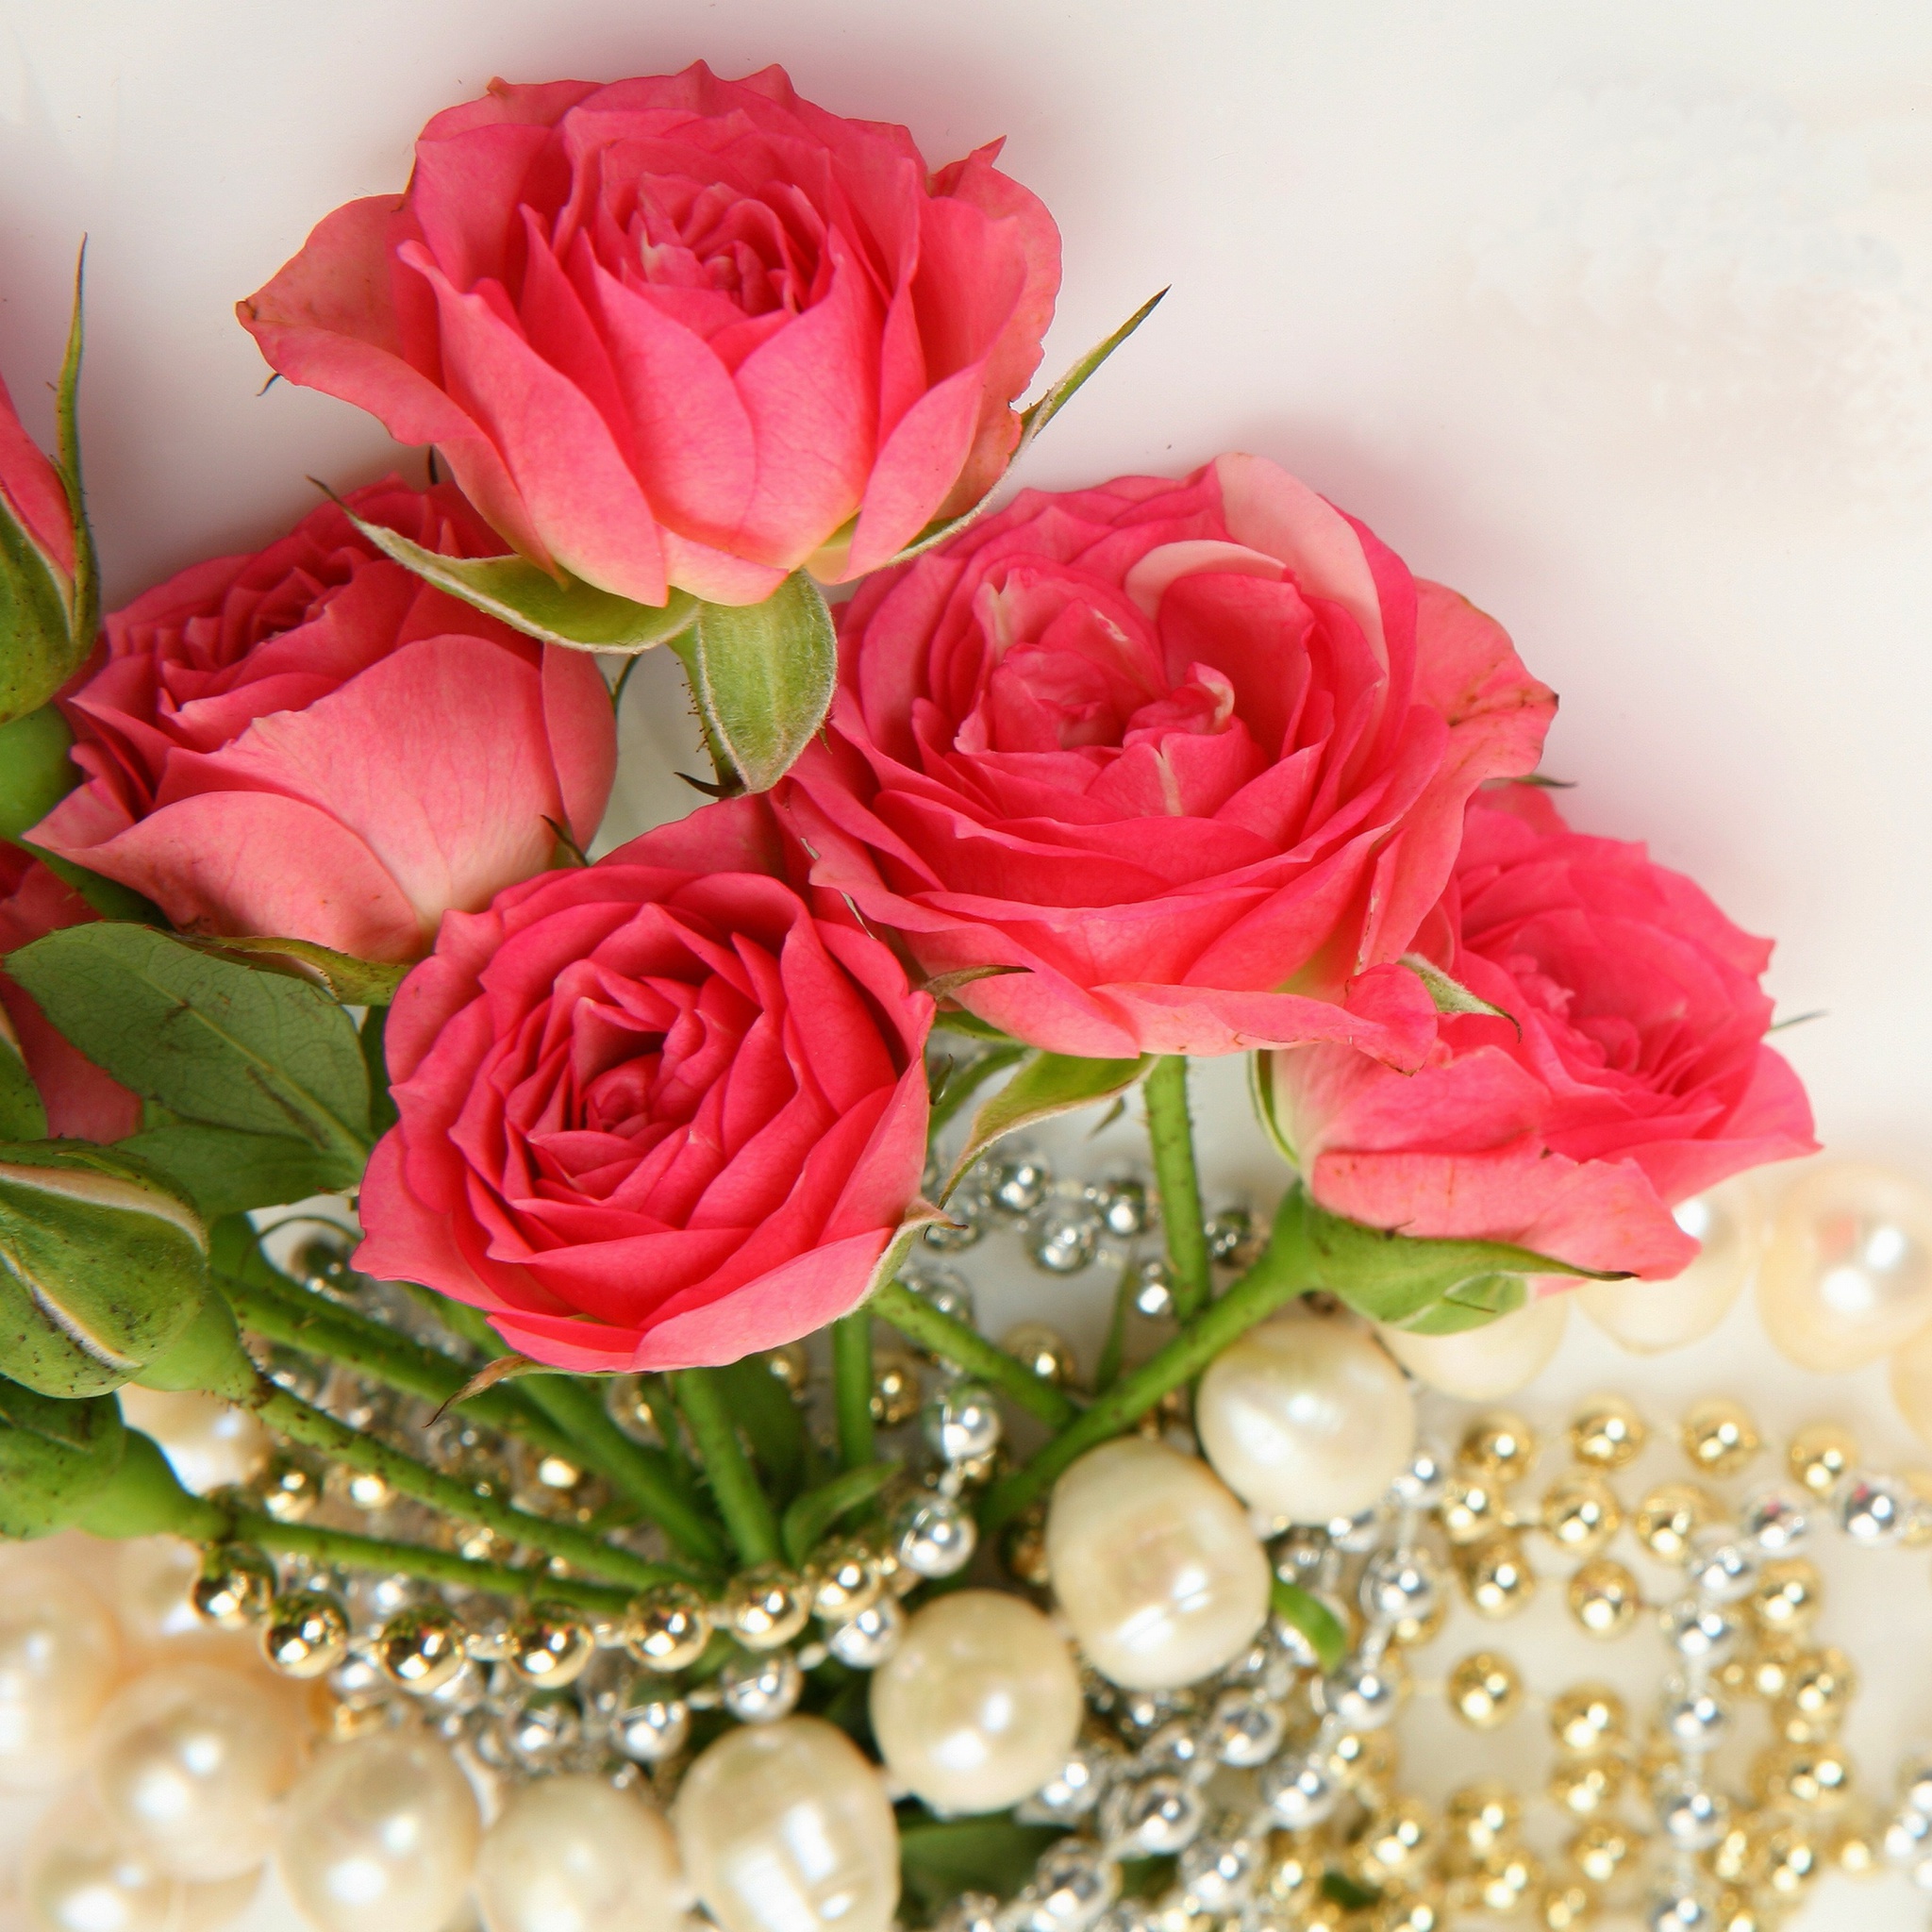 Necklace and Roses Bouquet wallpaper 2048x2048